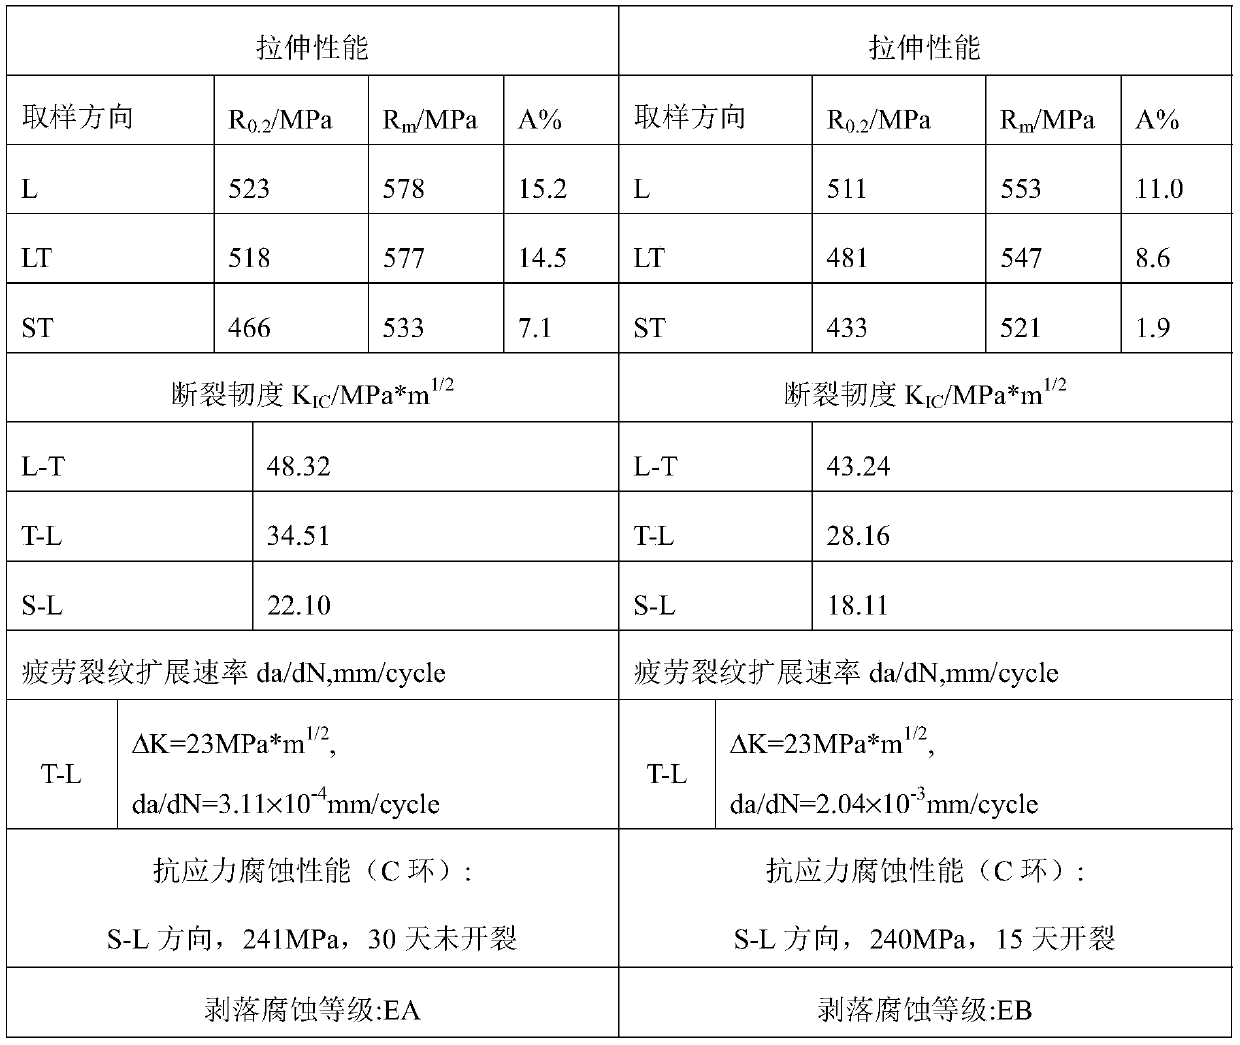 Preparation process for improving comprehensive performance of aluminum-lithium alloy product